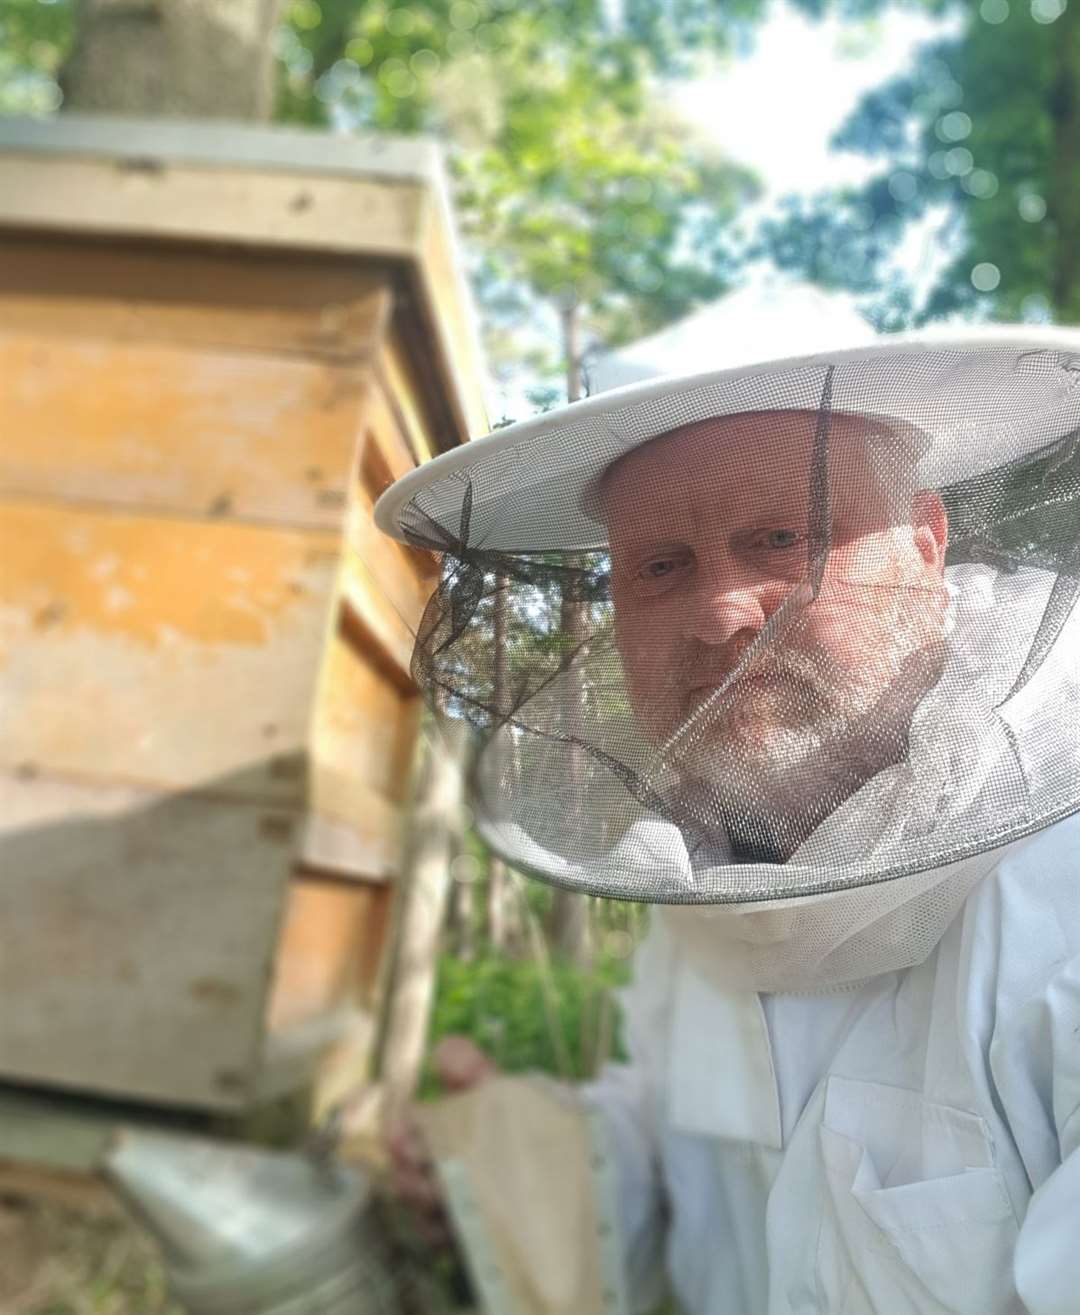 Cllr David Burton, leader of Maidstone Borough Council, is a passionate environmentalist and beekeeper